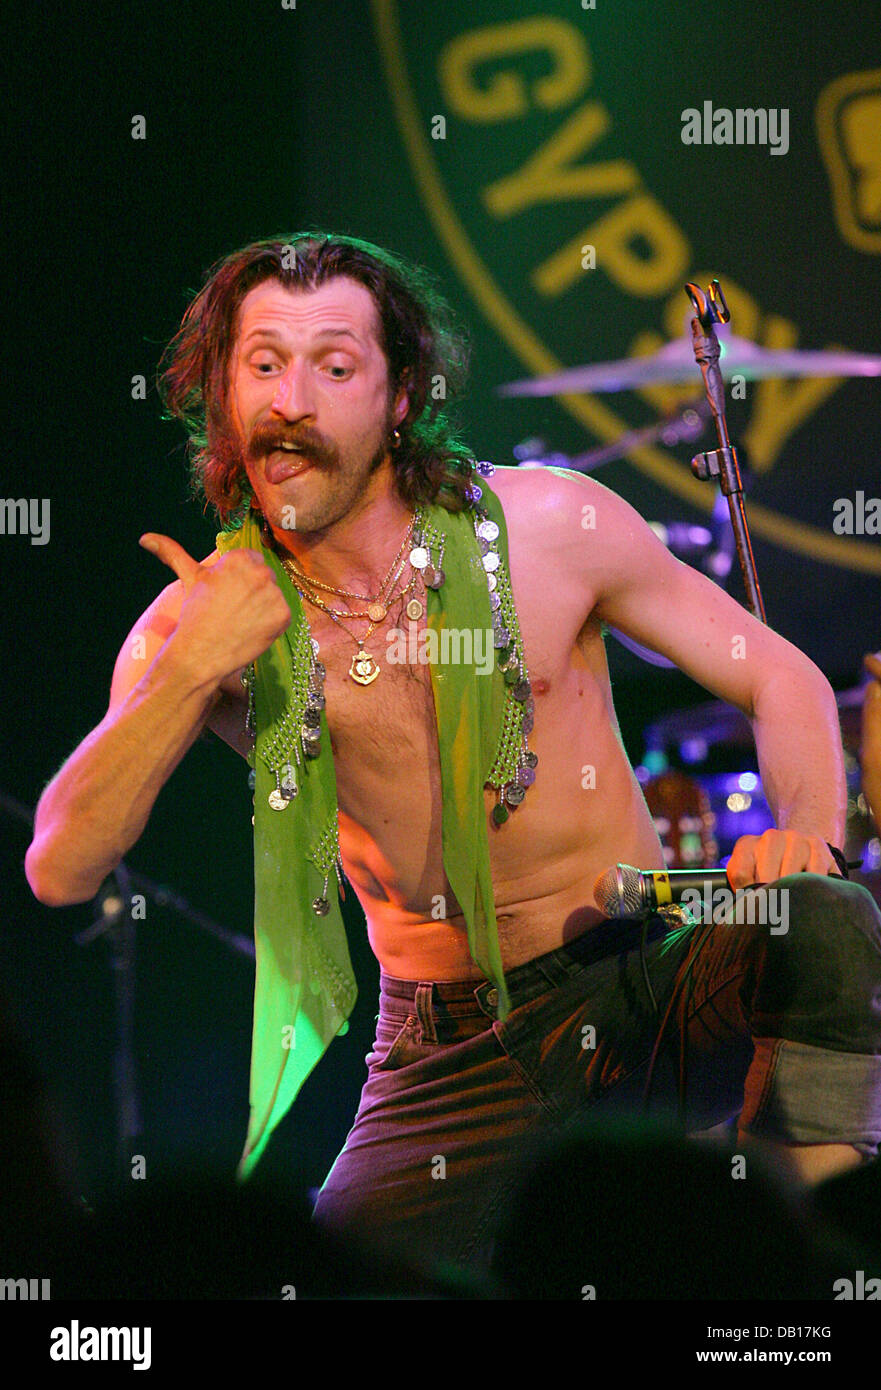 Eugene Hutz, singer of the 'Gipsy Punk' band 'Gogol Bordello' performs at  the band's tour start in a disco in Frankfurt Main, Germany, 12 November  2007. Photo: Uwe Anspach Stock Photo - Alamy